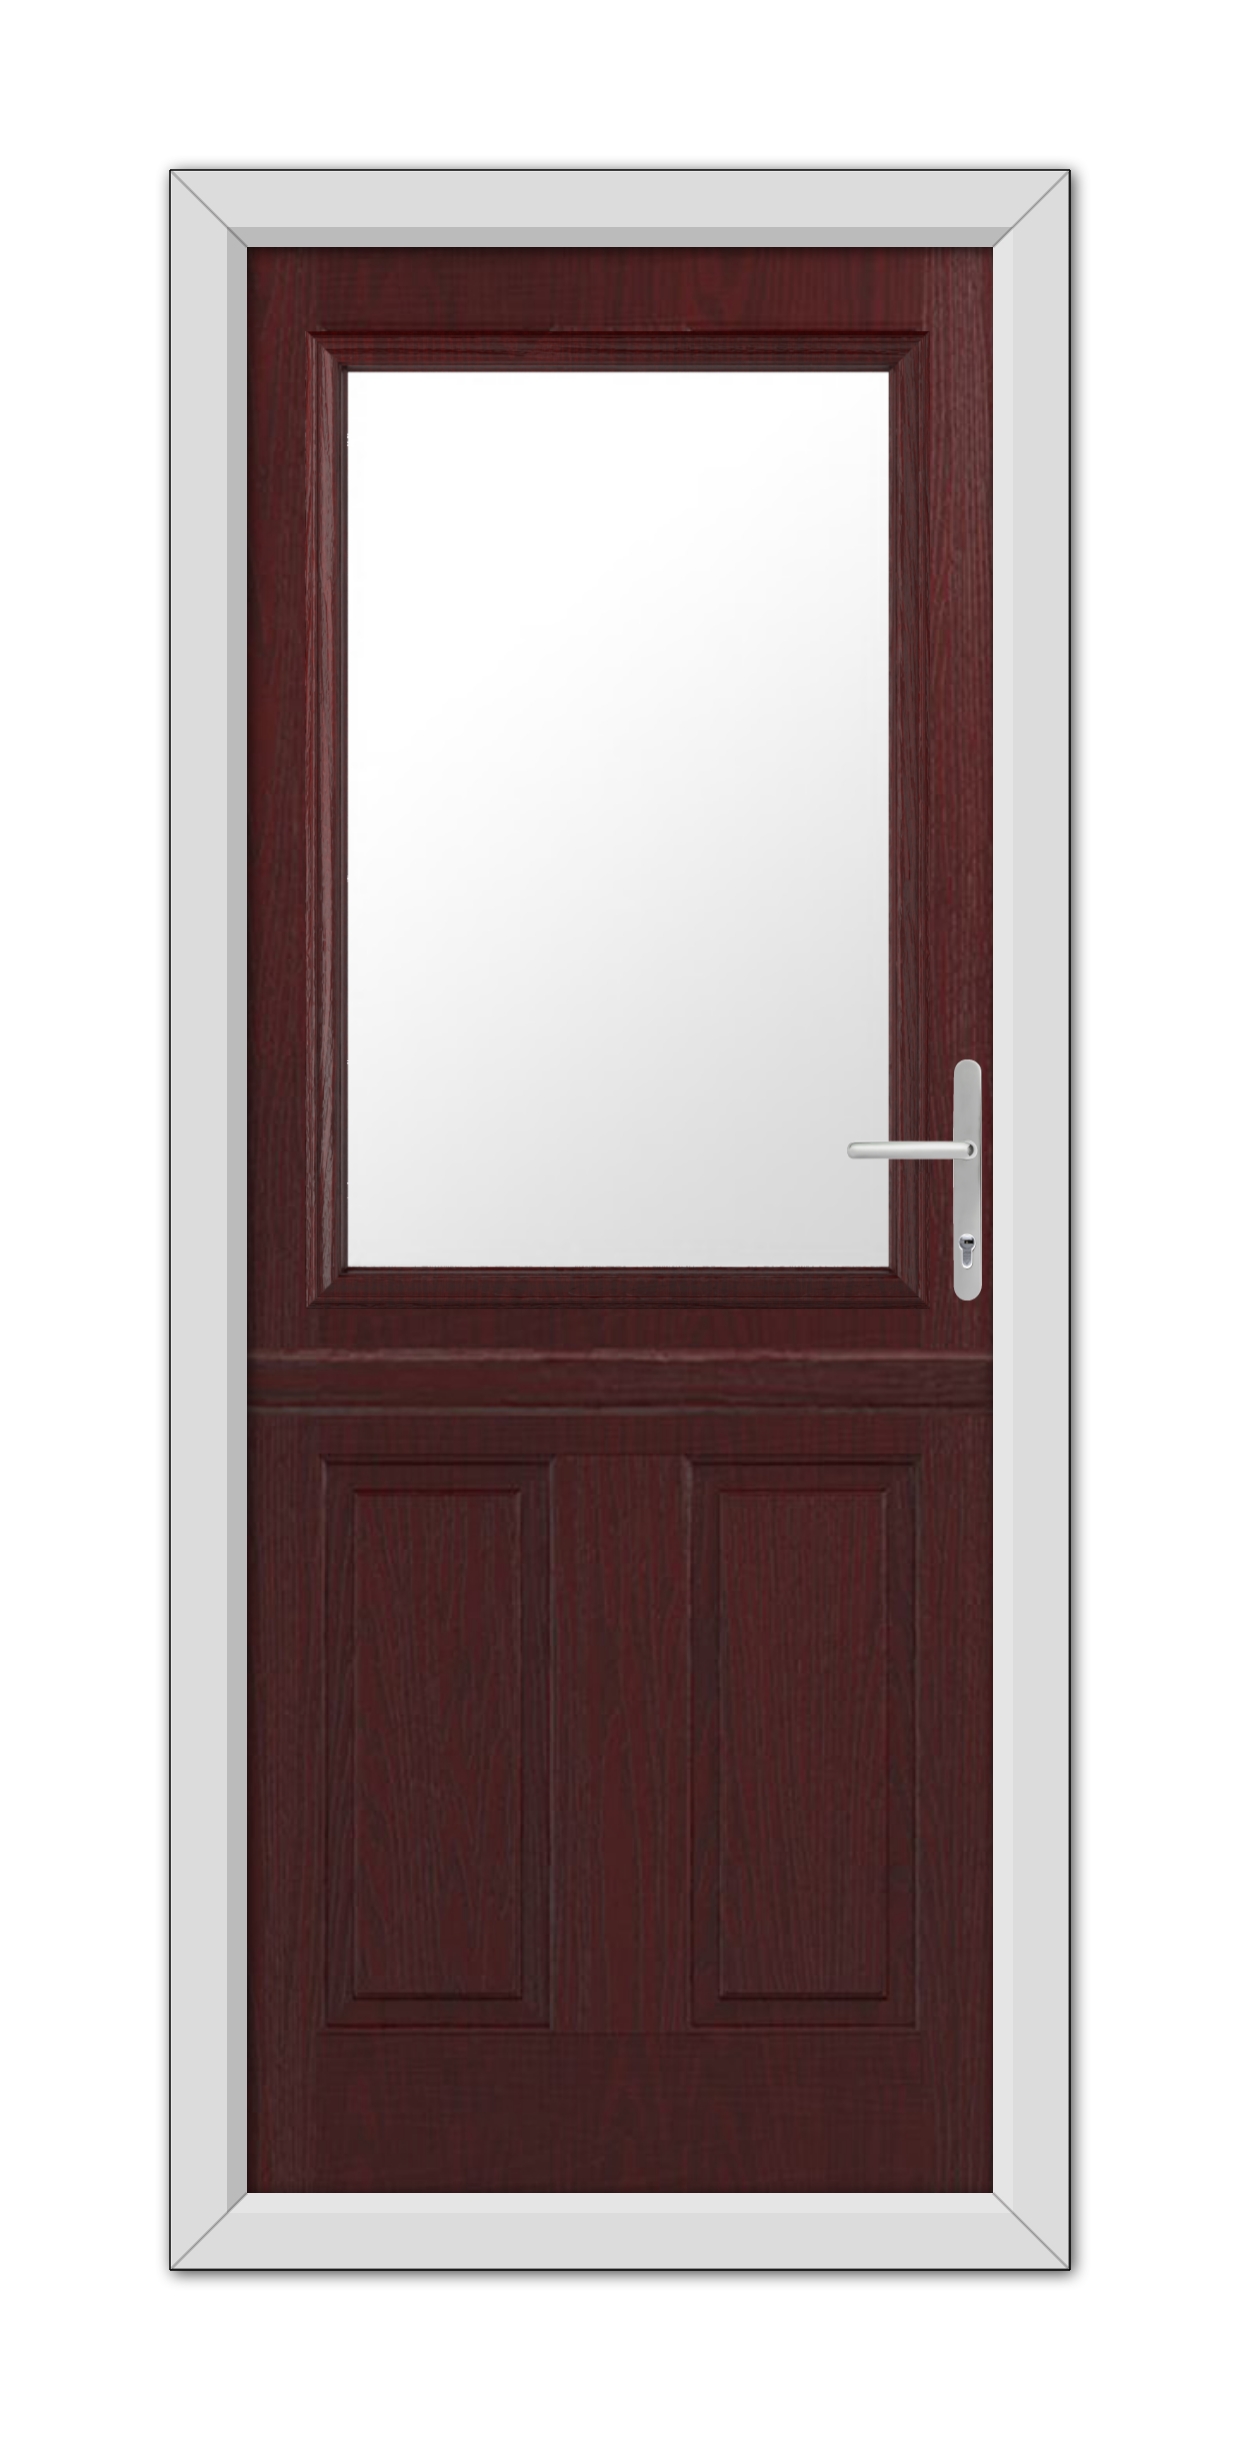 Rosewood Buxton Stable Composite 48mm Timber Core Door with a large glass panel on top, a solid wood lower half, and a modern handle, framed by a simple white casing.